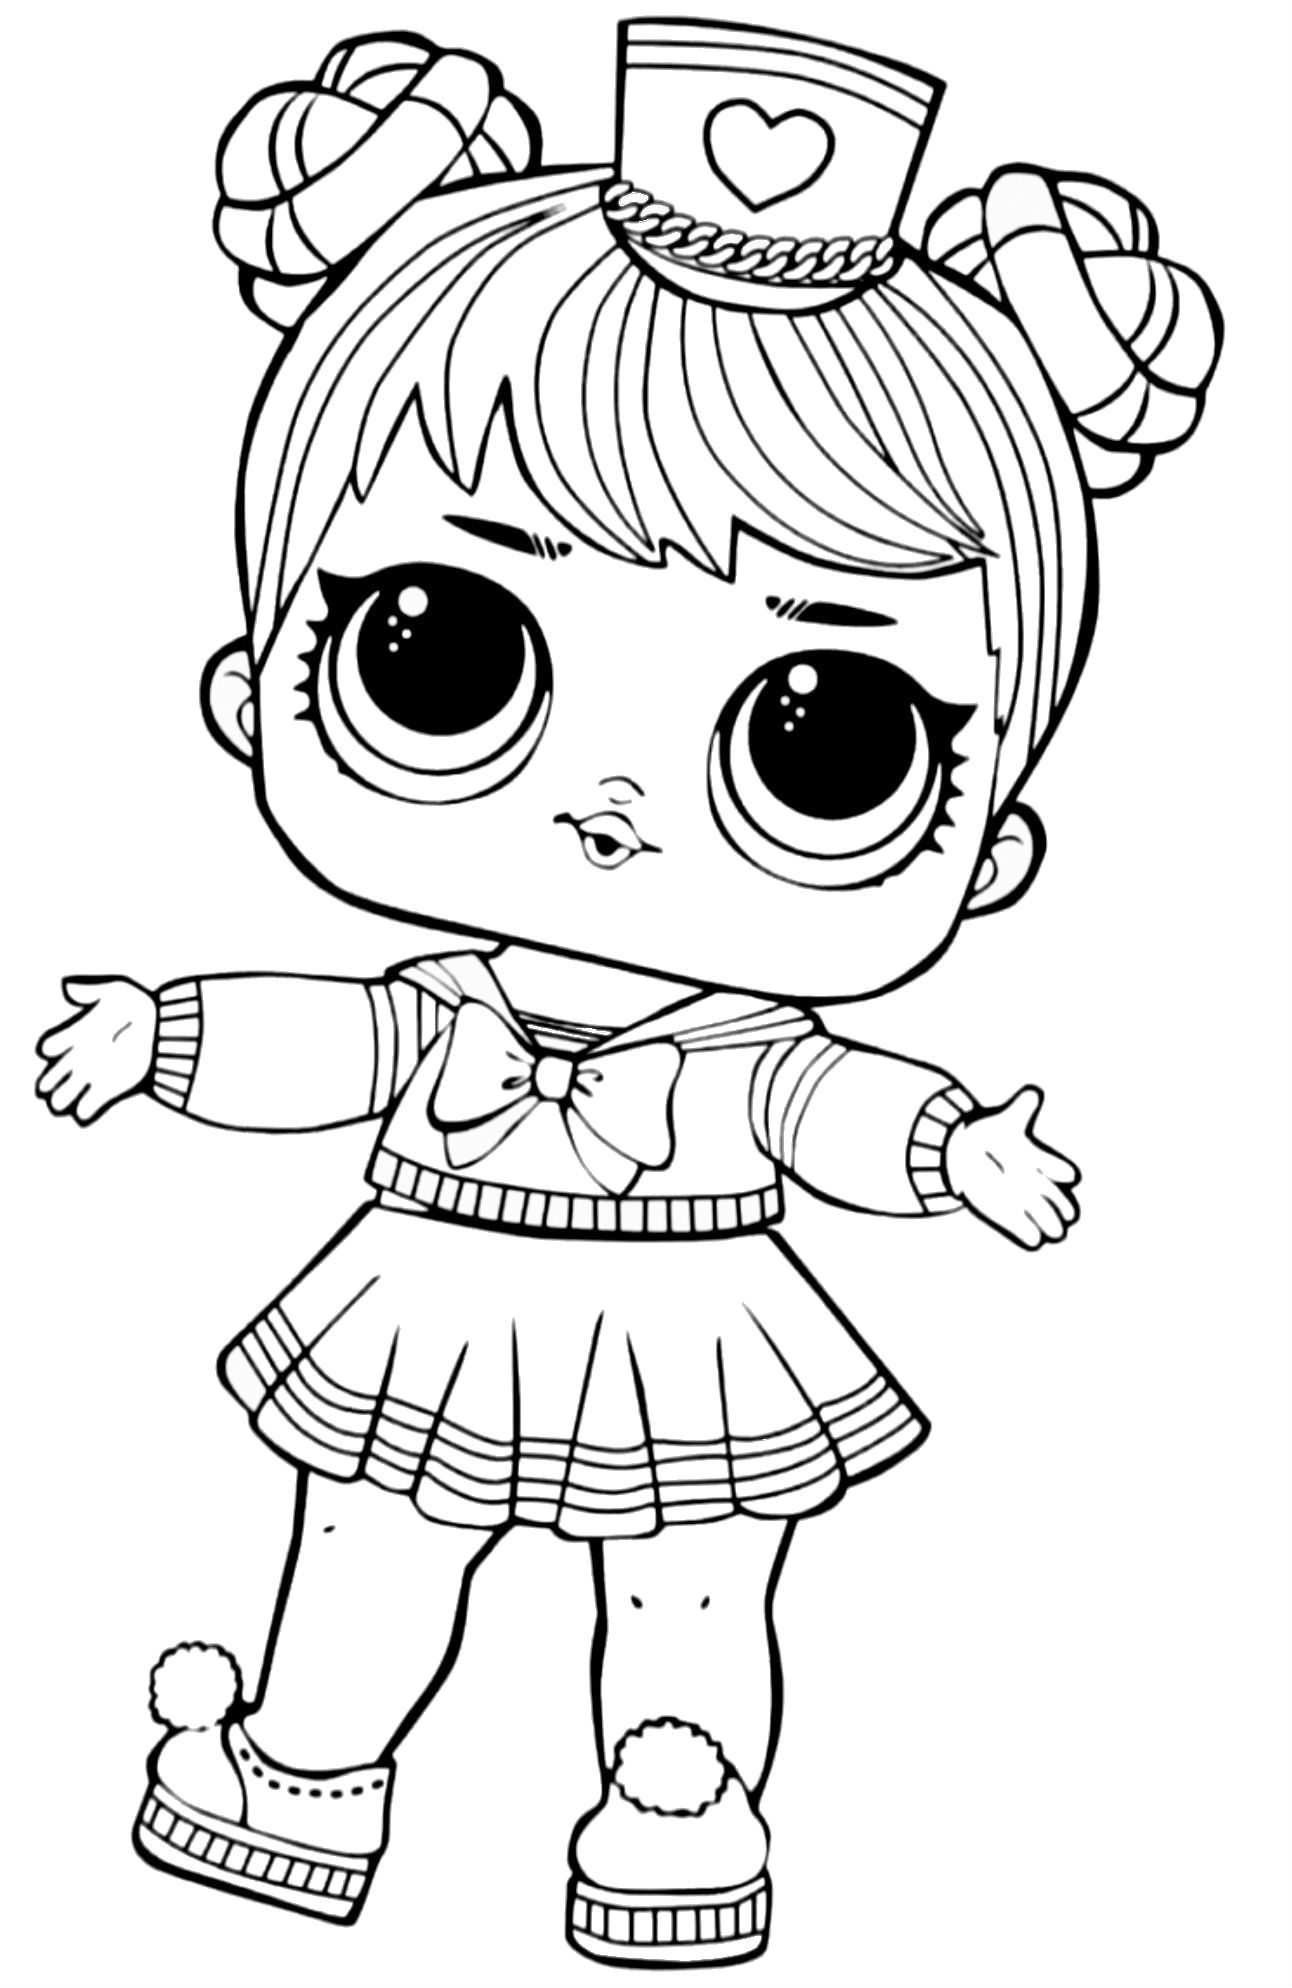 LOL Coloring Pages FREE Printable 99